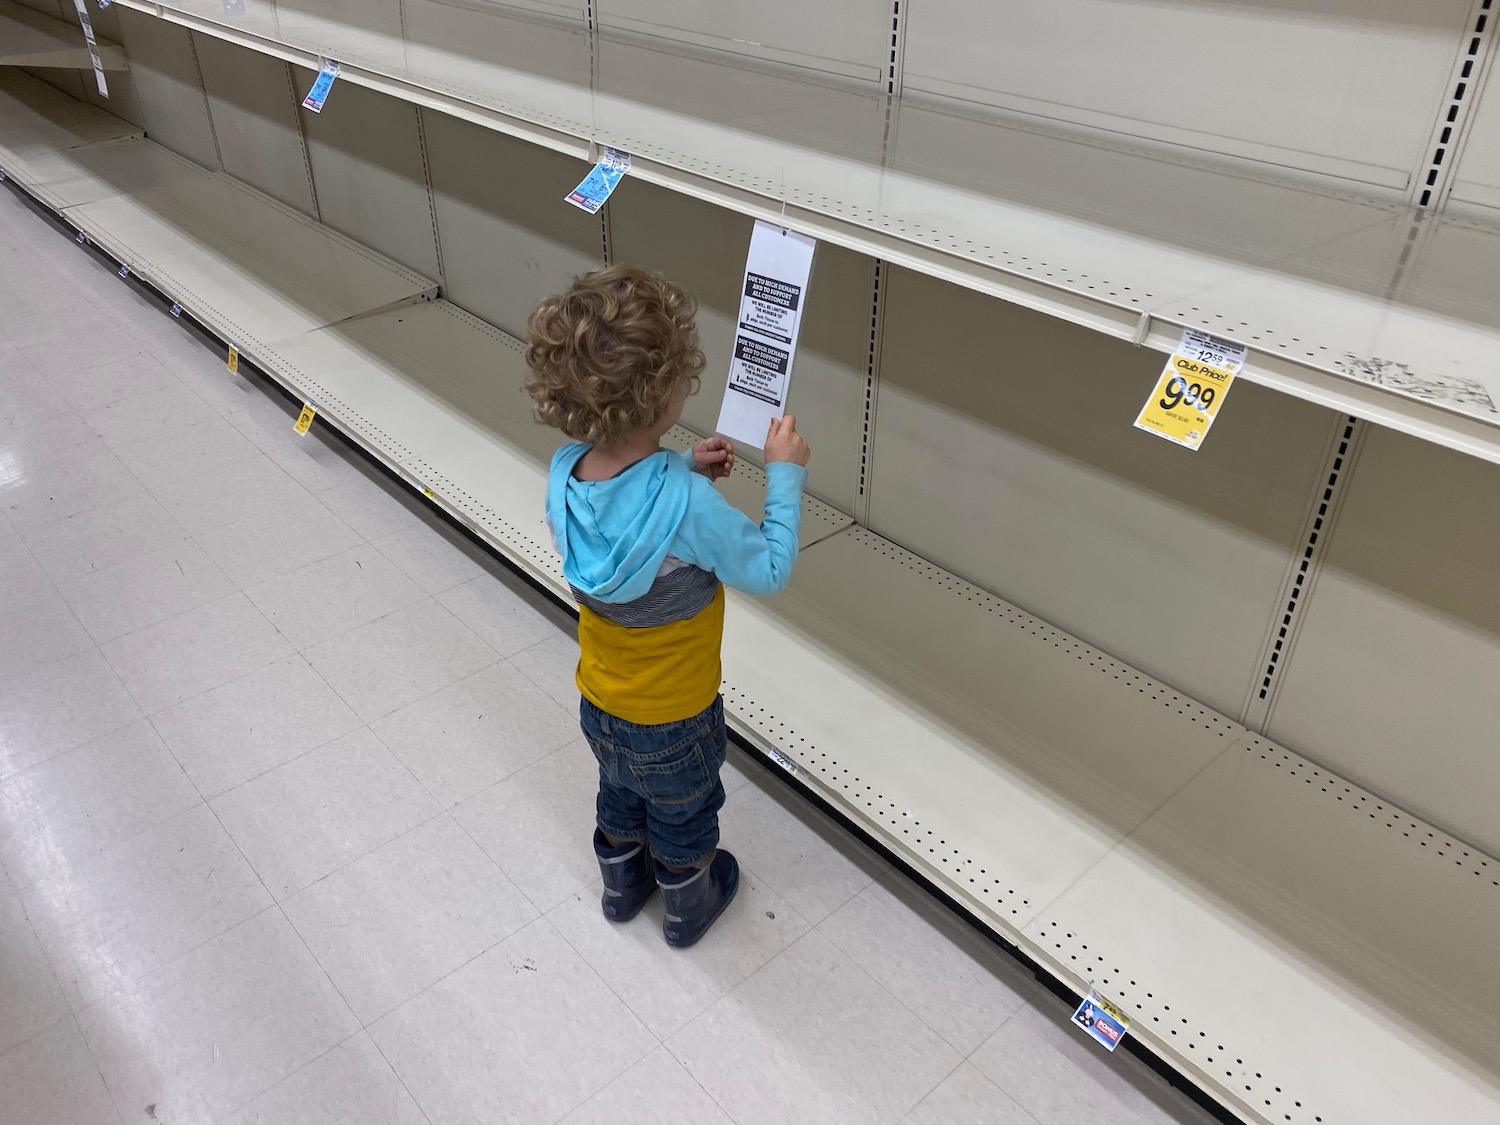 a child looking at a price tag on a shelf